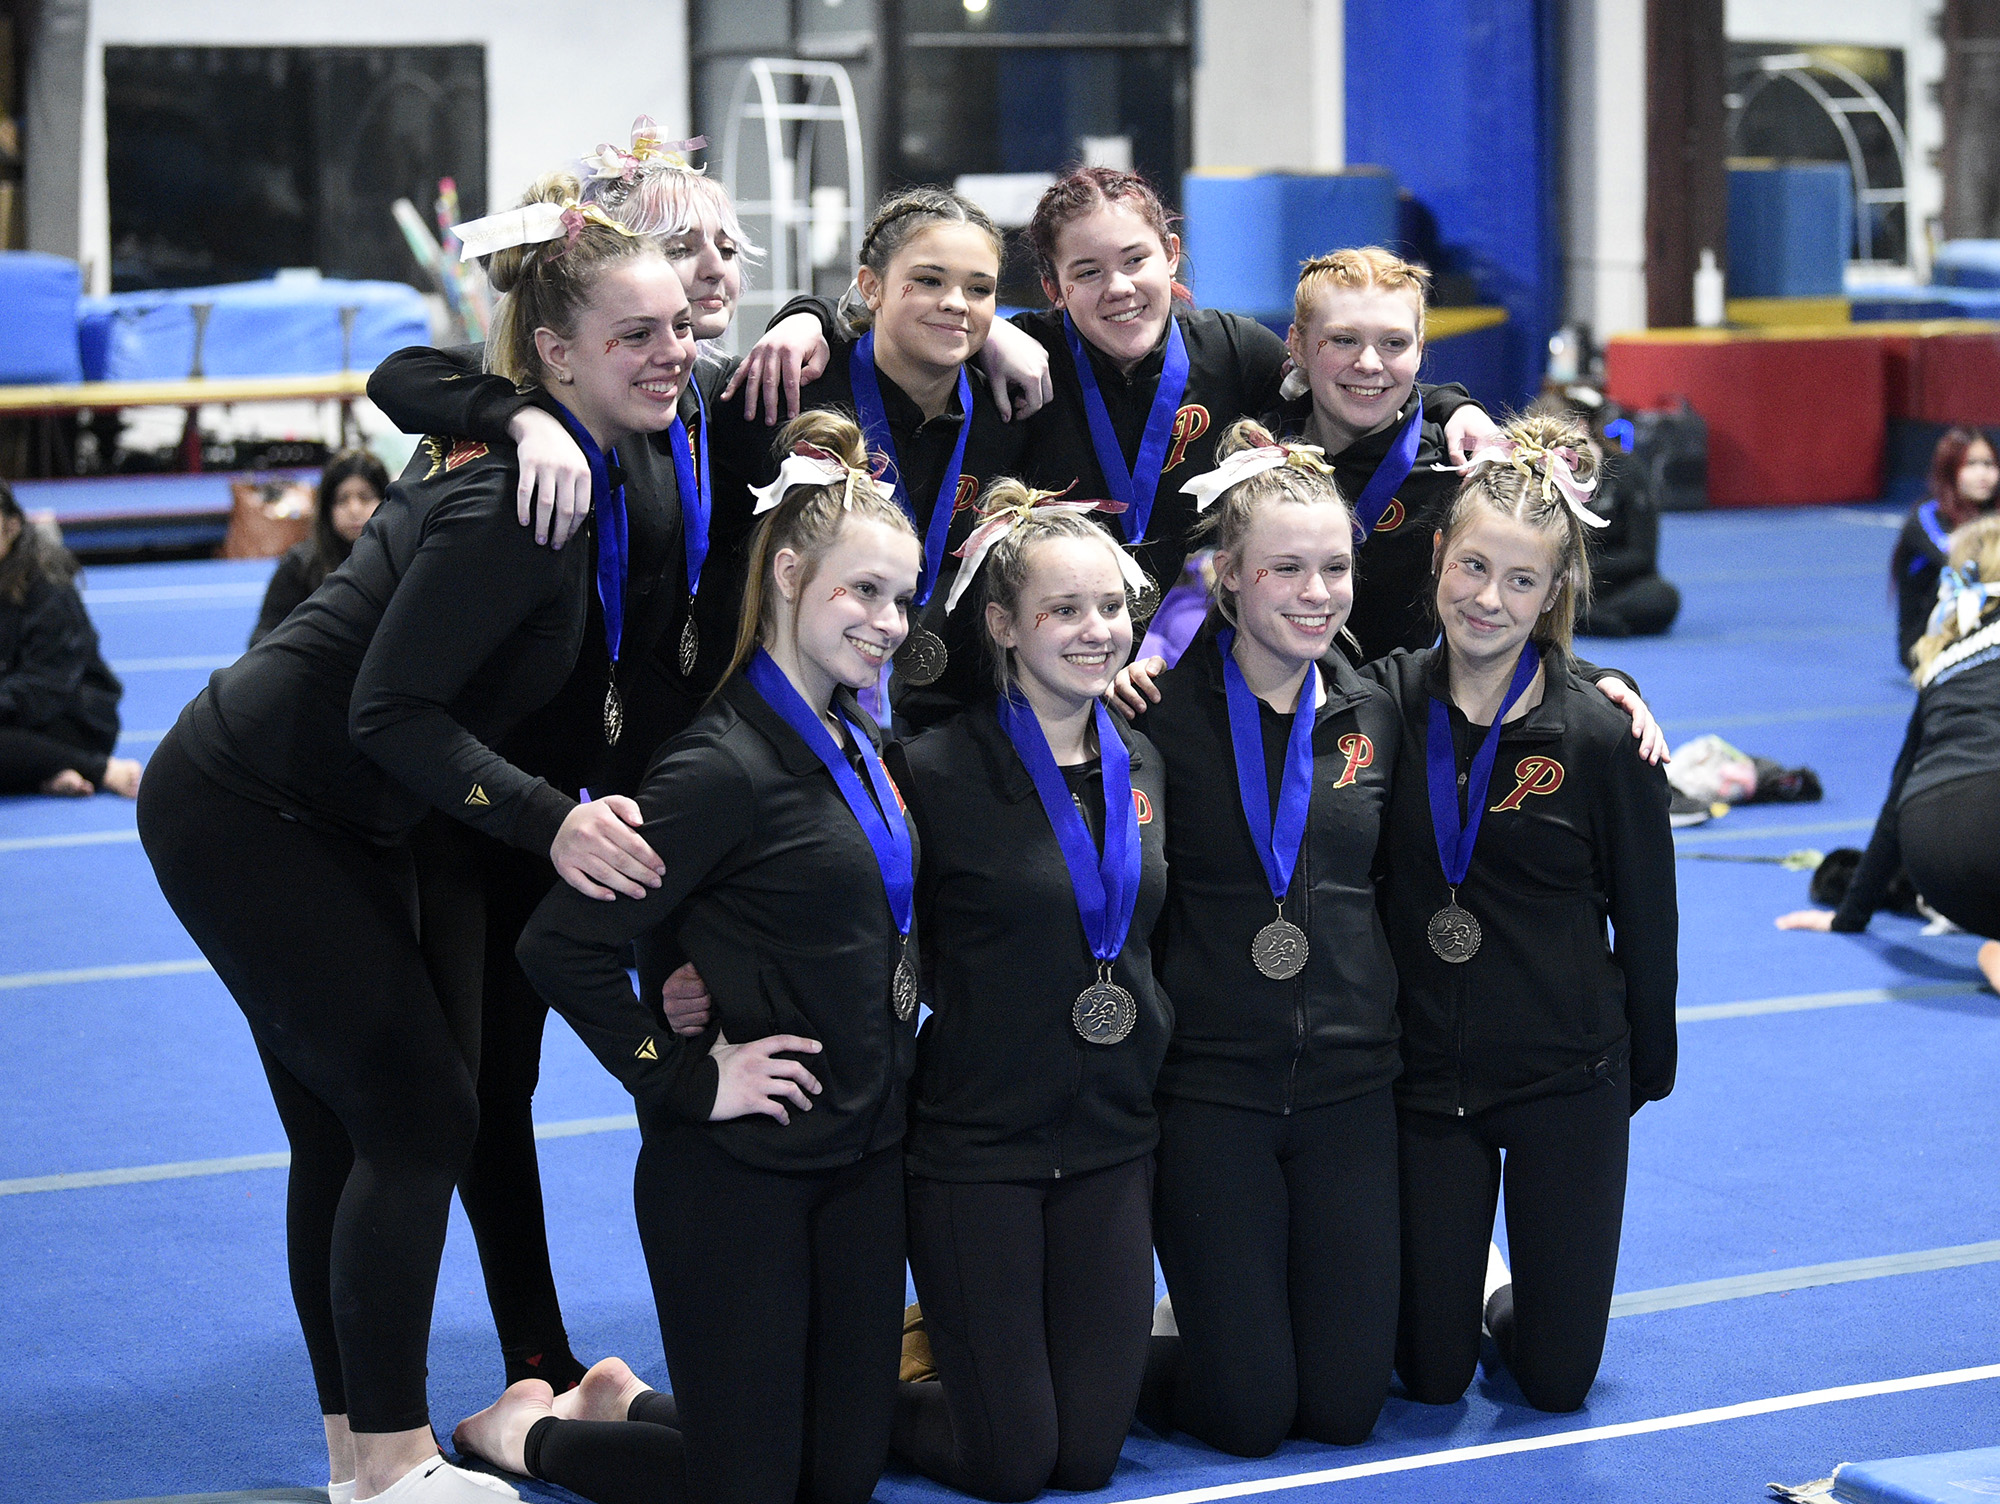 The Prairie gymnastics team poses for a photo after capturing the team title at the Class 3A District 4 meet at Northpointe on Saturday, Feb. 11, 2023.